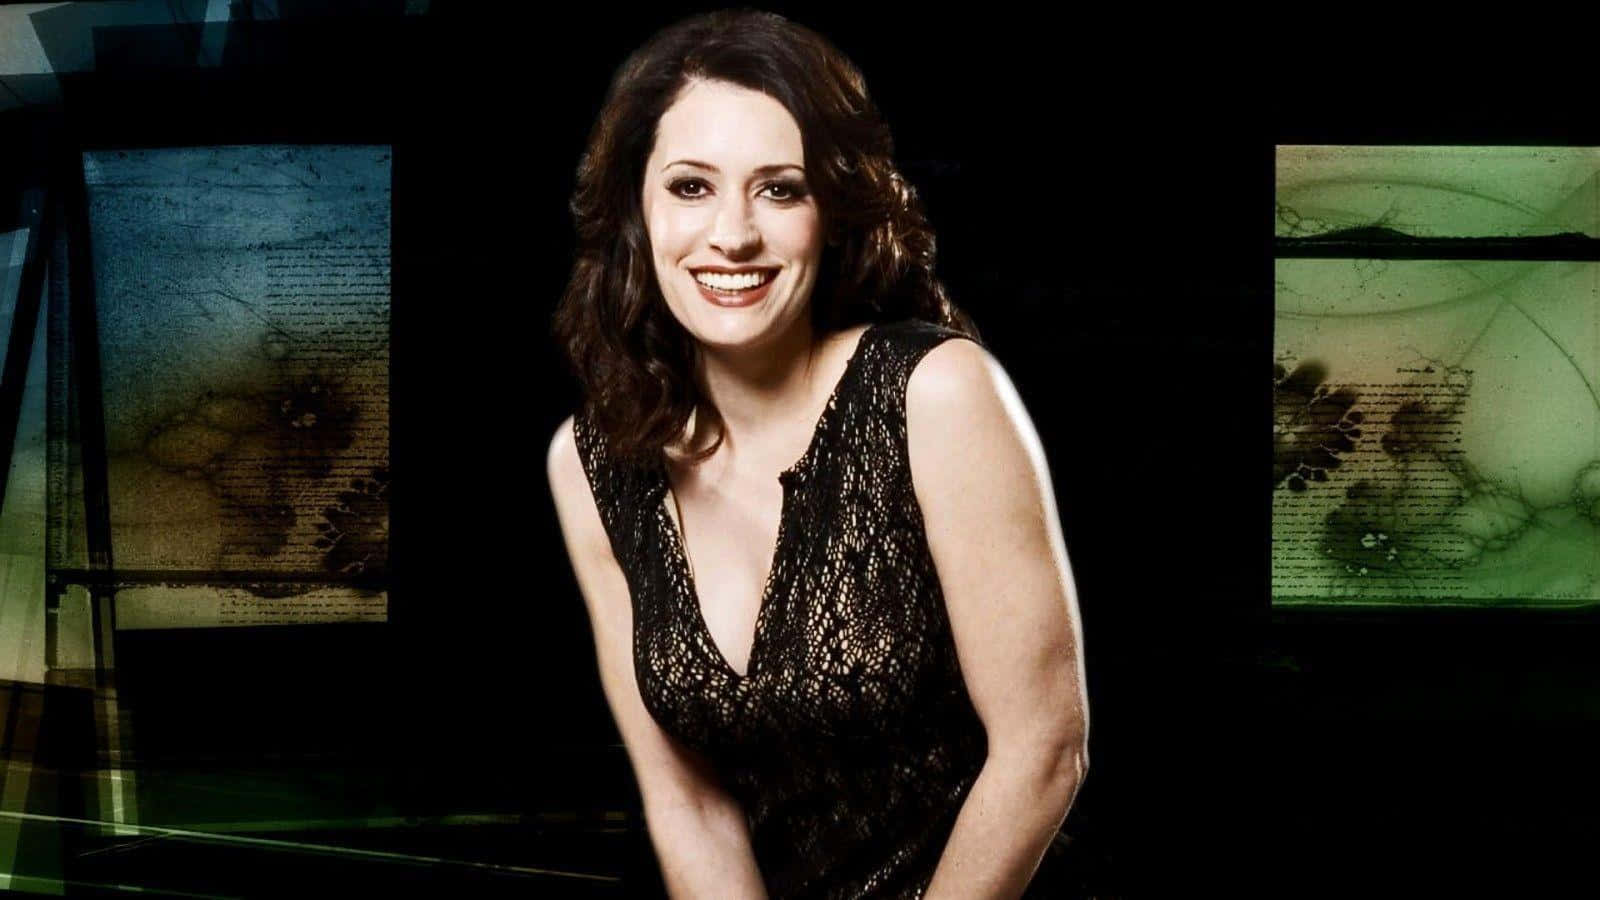 Paget Brewster posing for a photoshoot Wallpaper